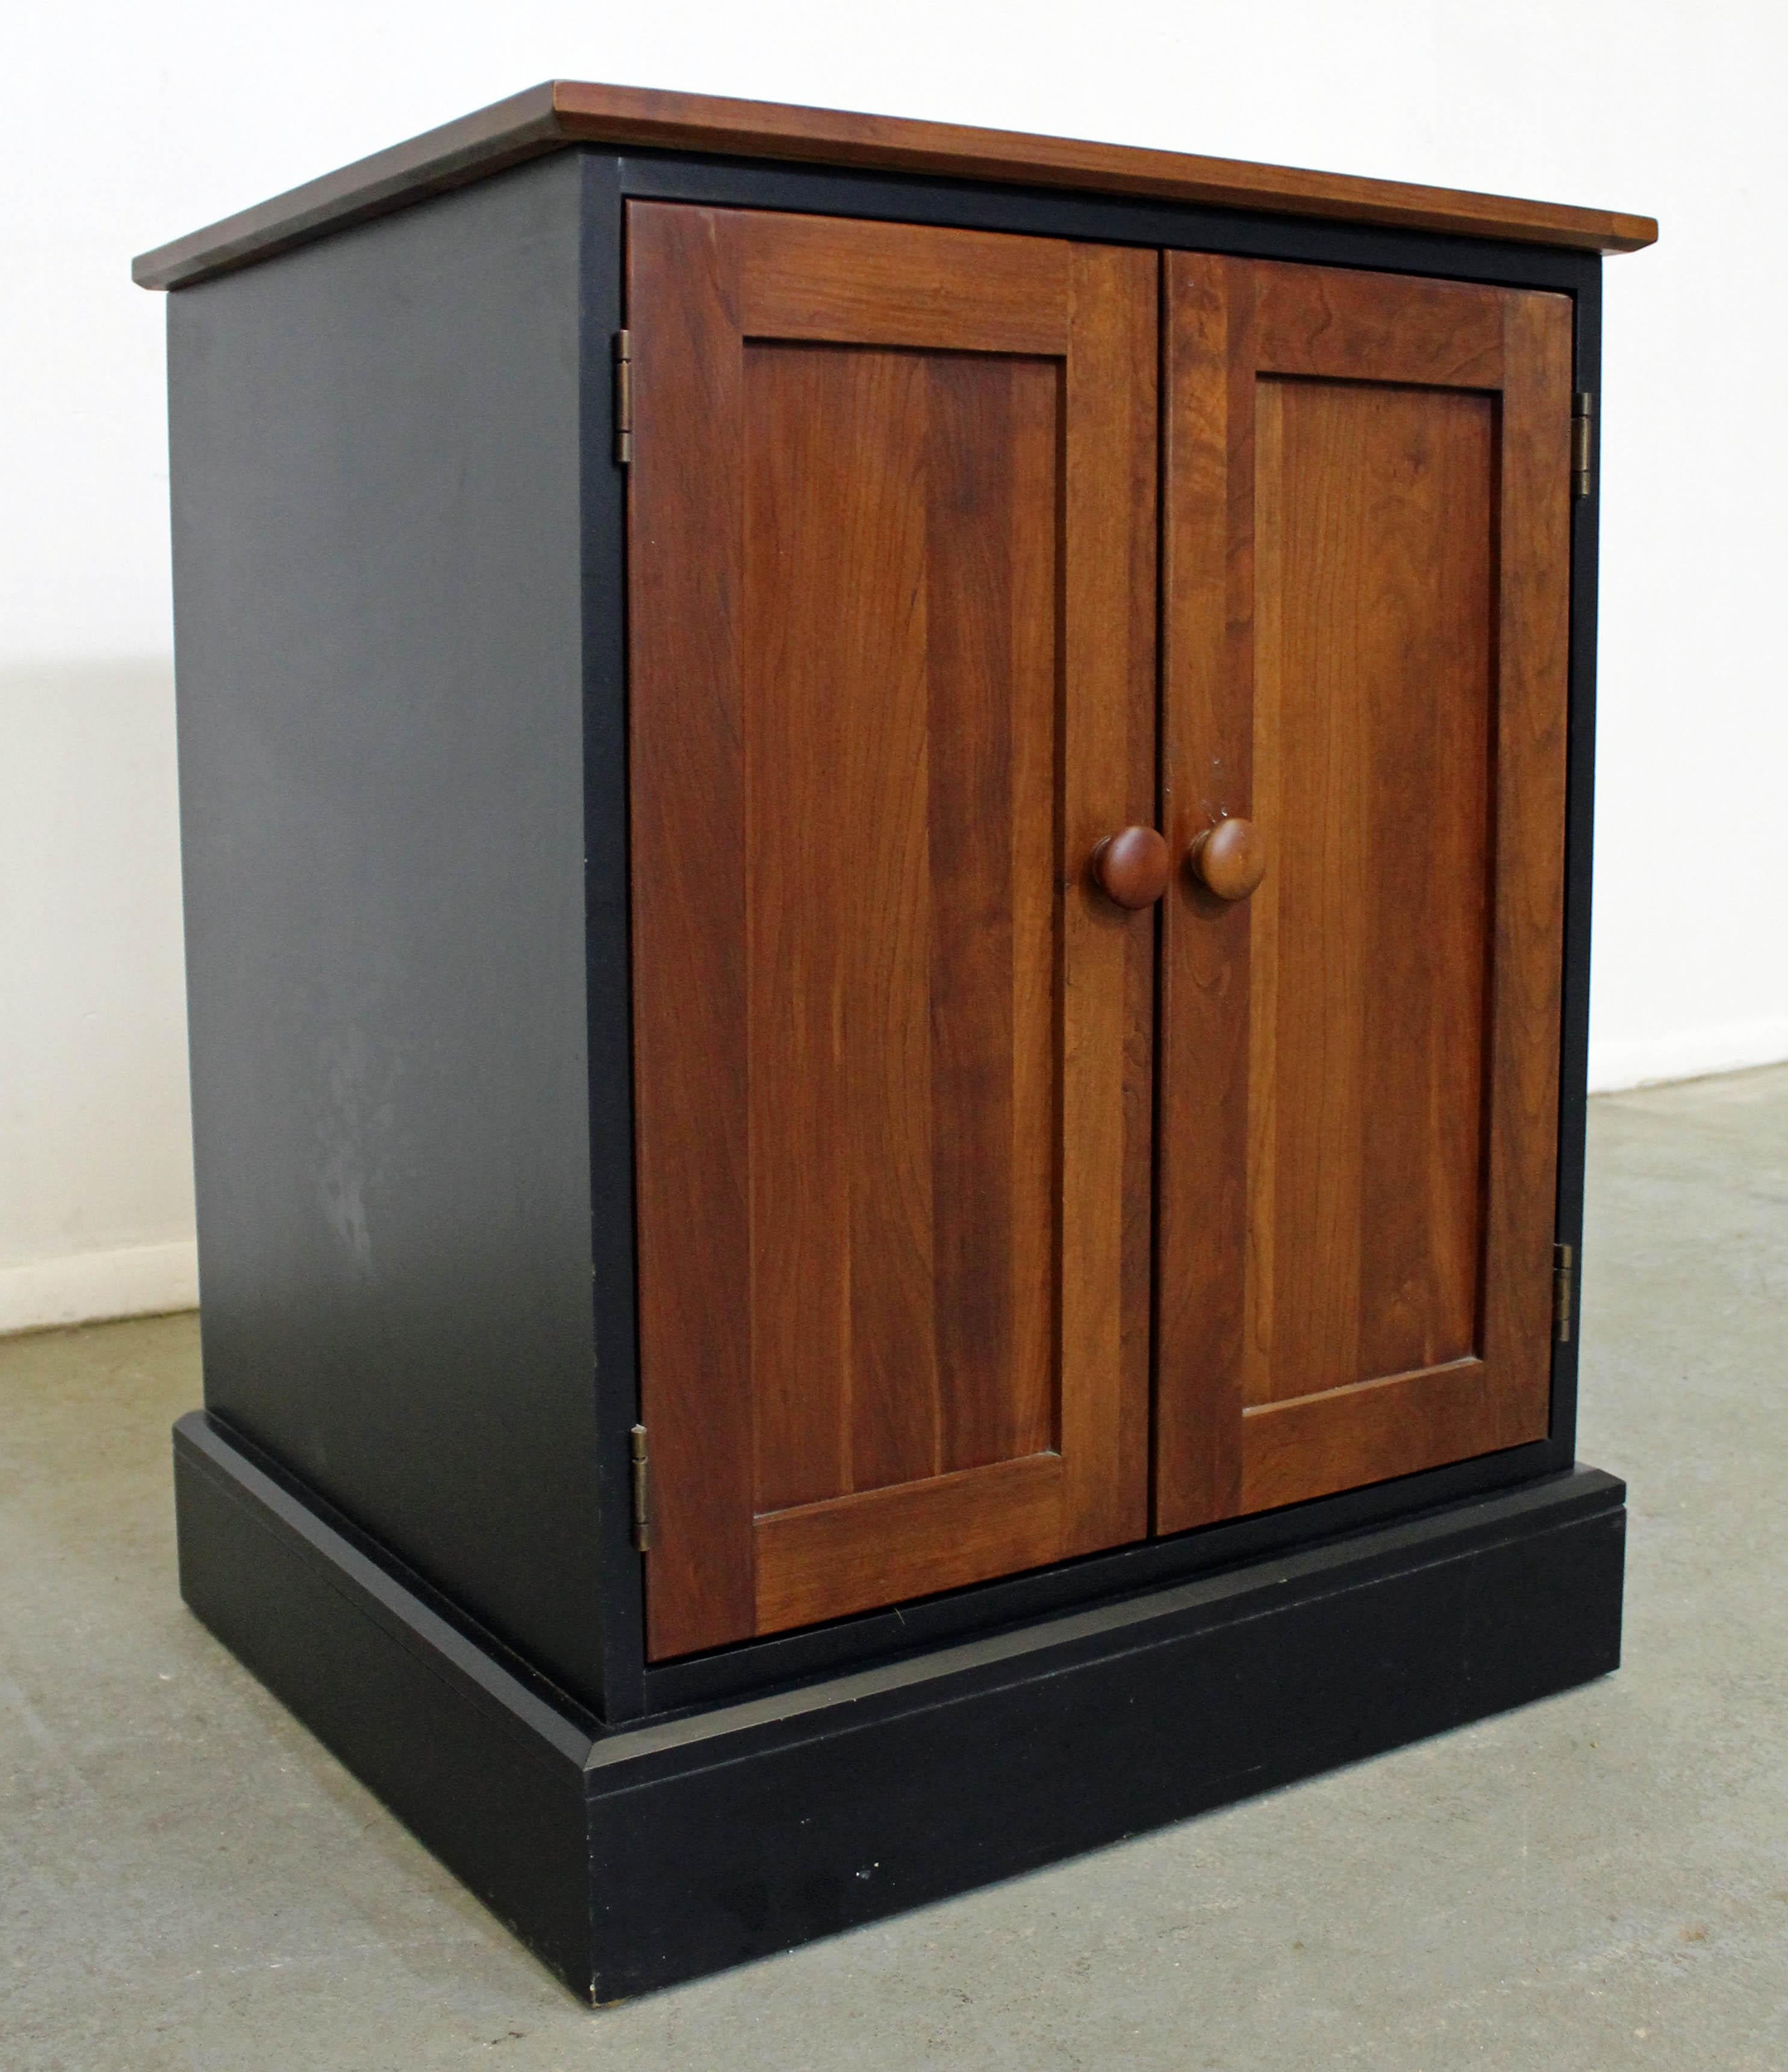 Offered is an cherry Ethan Allen 'American Impressions' nightstand/cabinet with black accents, in 620 autumn cherry with satin black finish. Features two doors and three adjustable shelves inside. This line drew inspiration from the Arts & Craft and